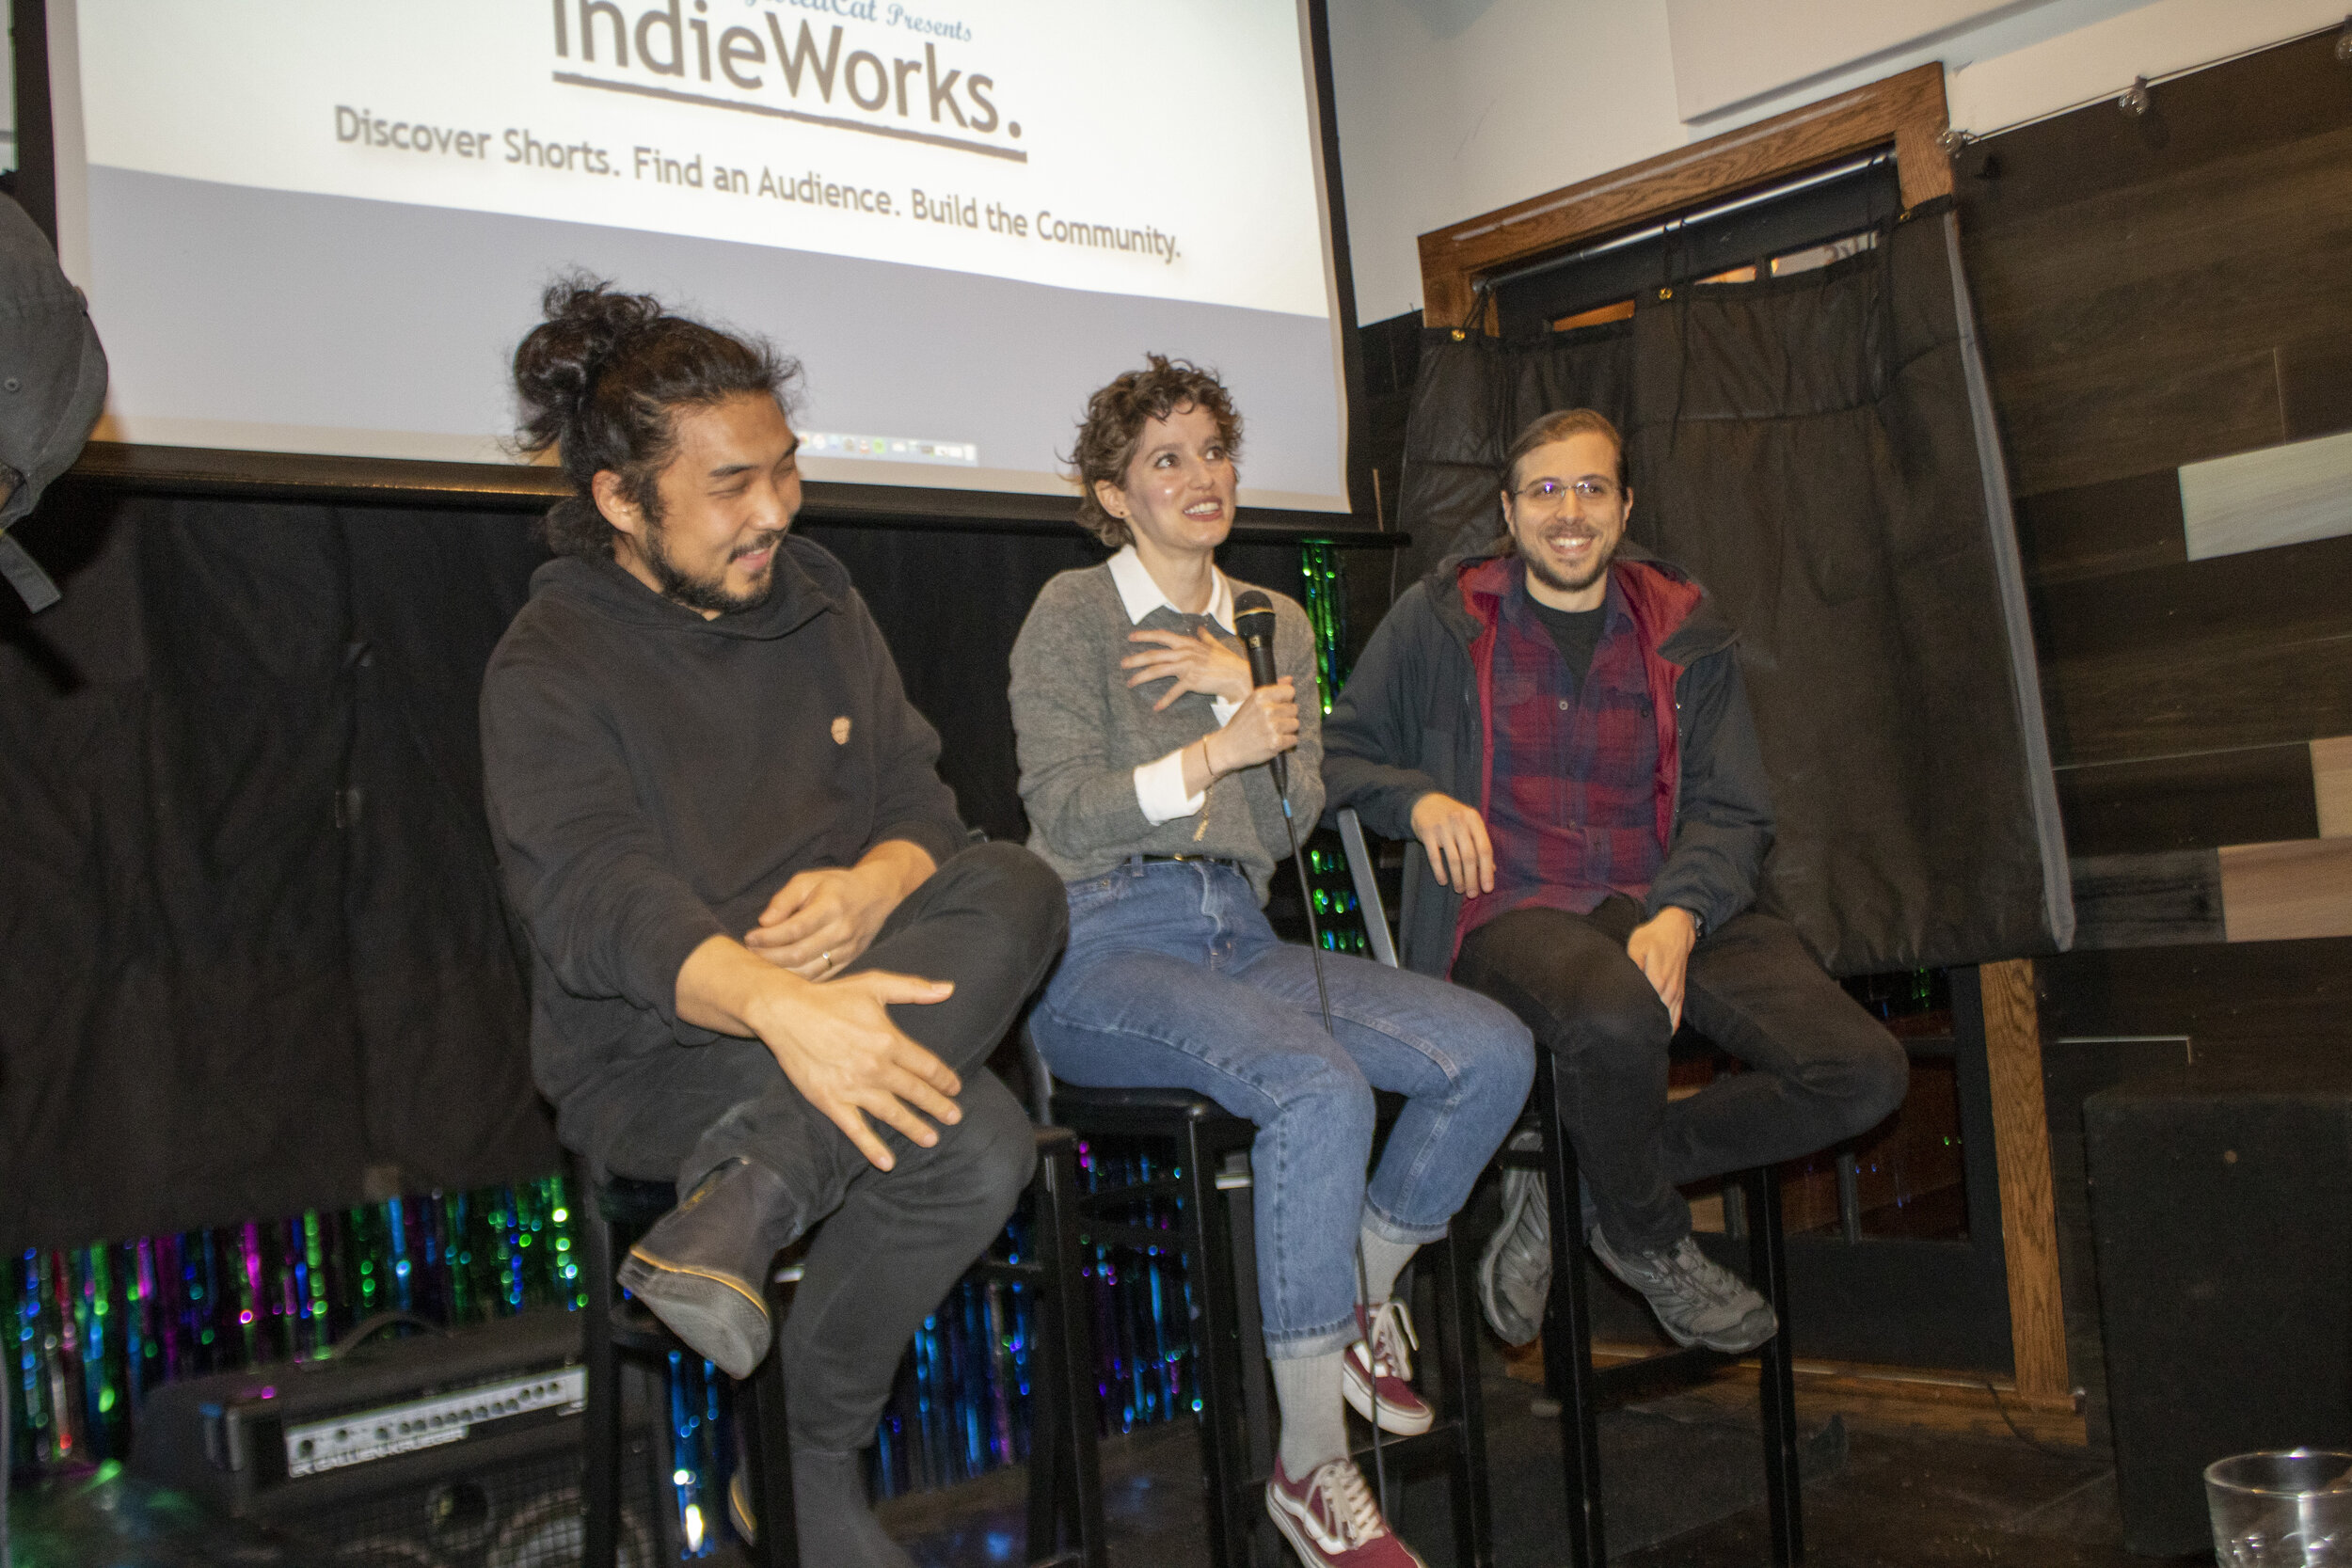 IndieWorks_March2020_63.jpg